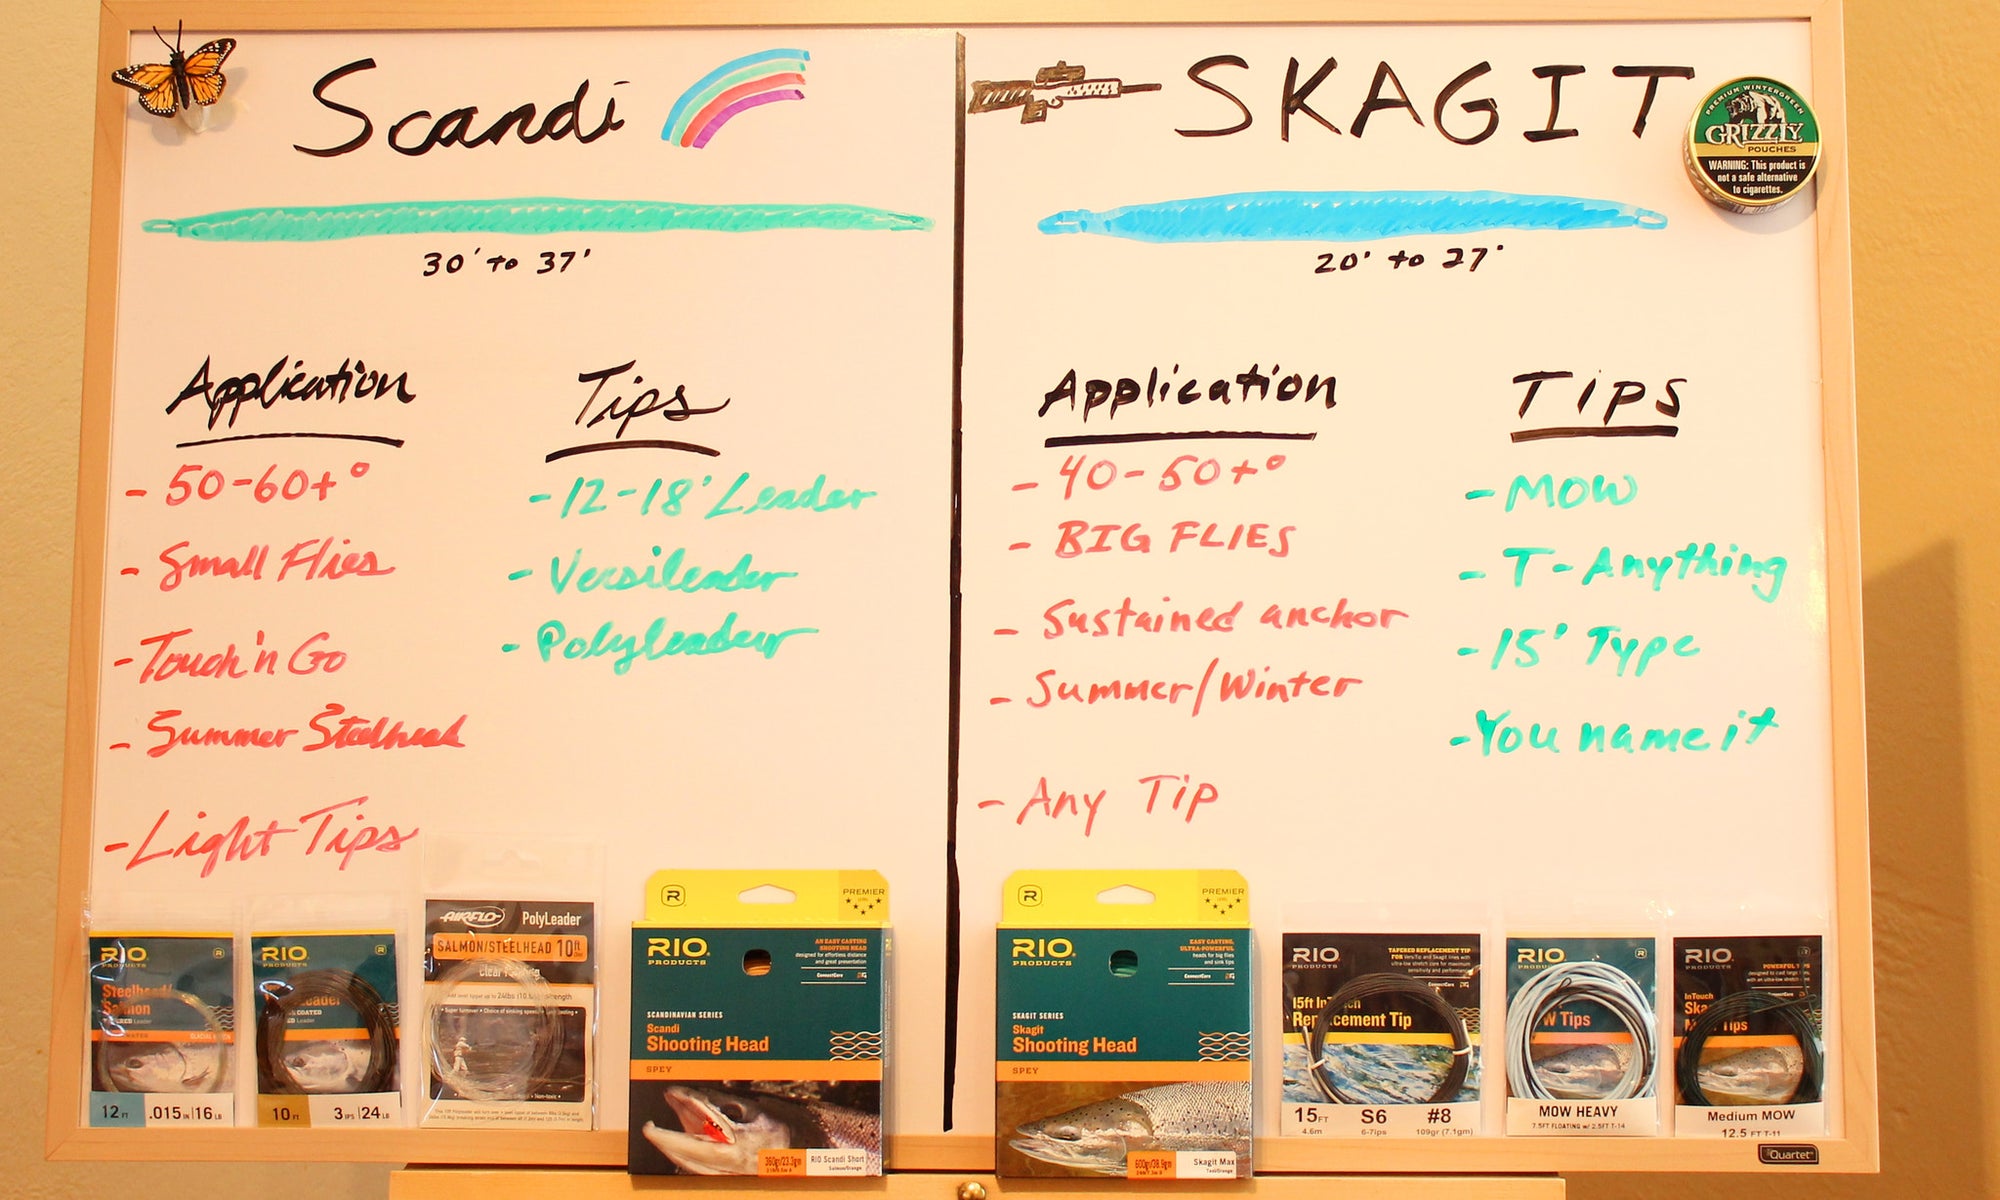 When to use Scandi and When to use Skagit